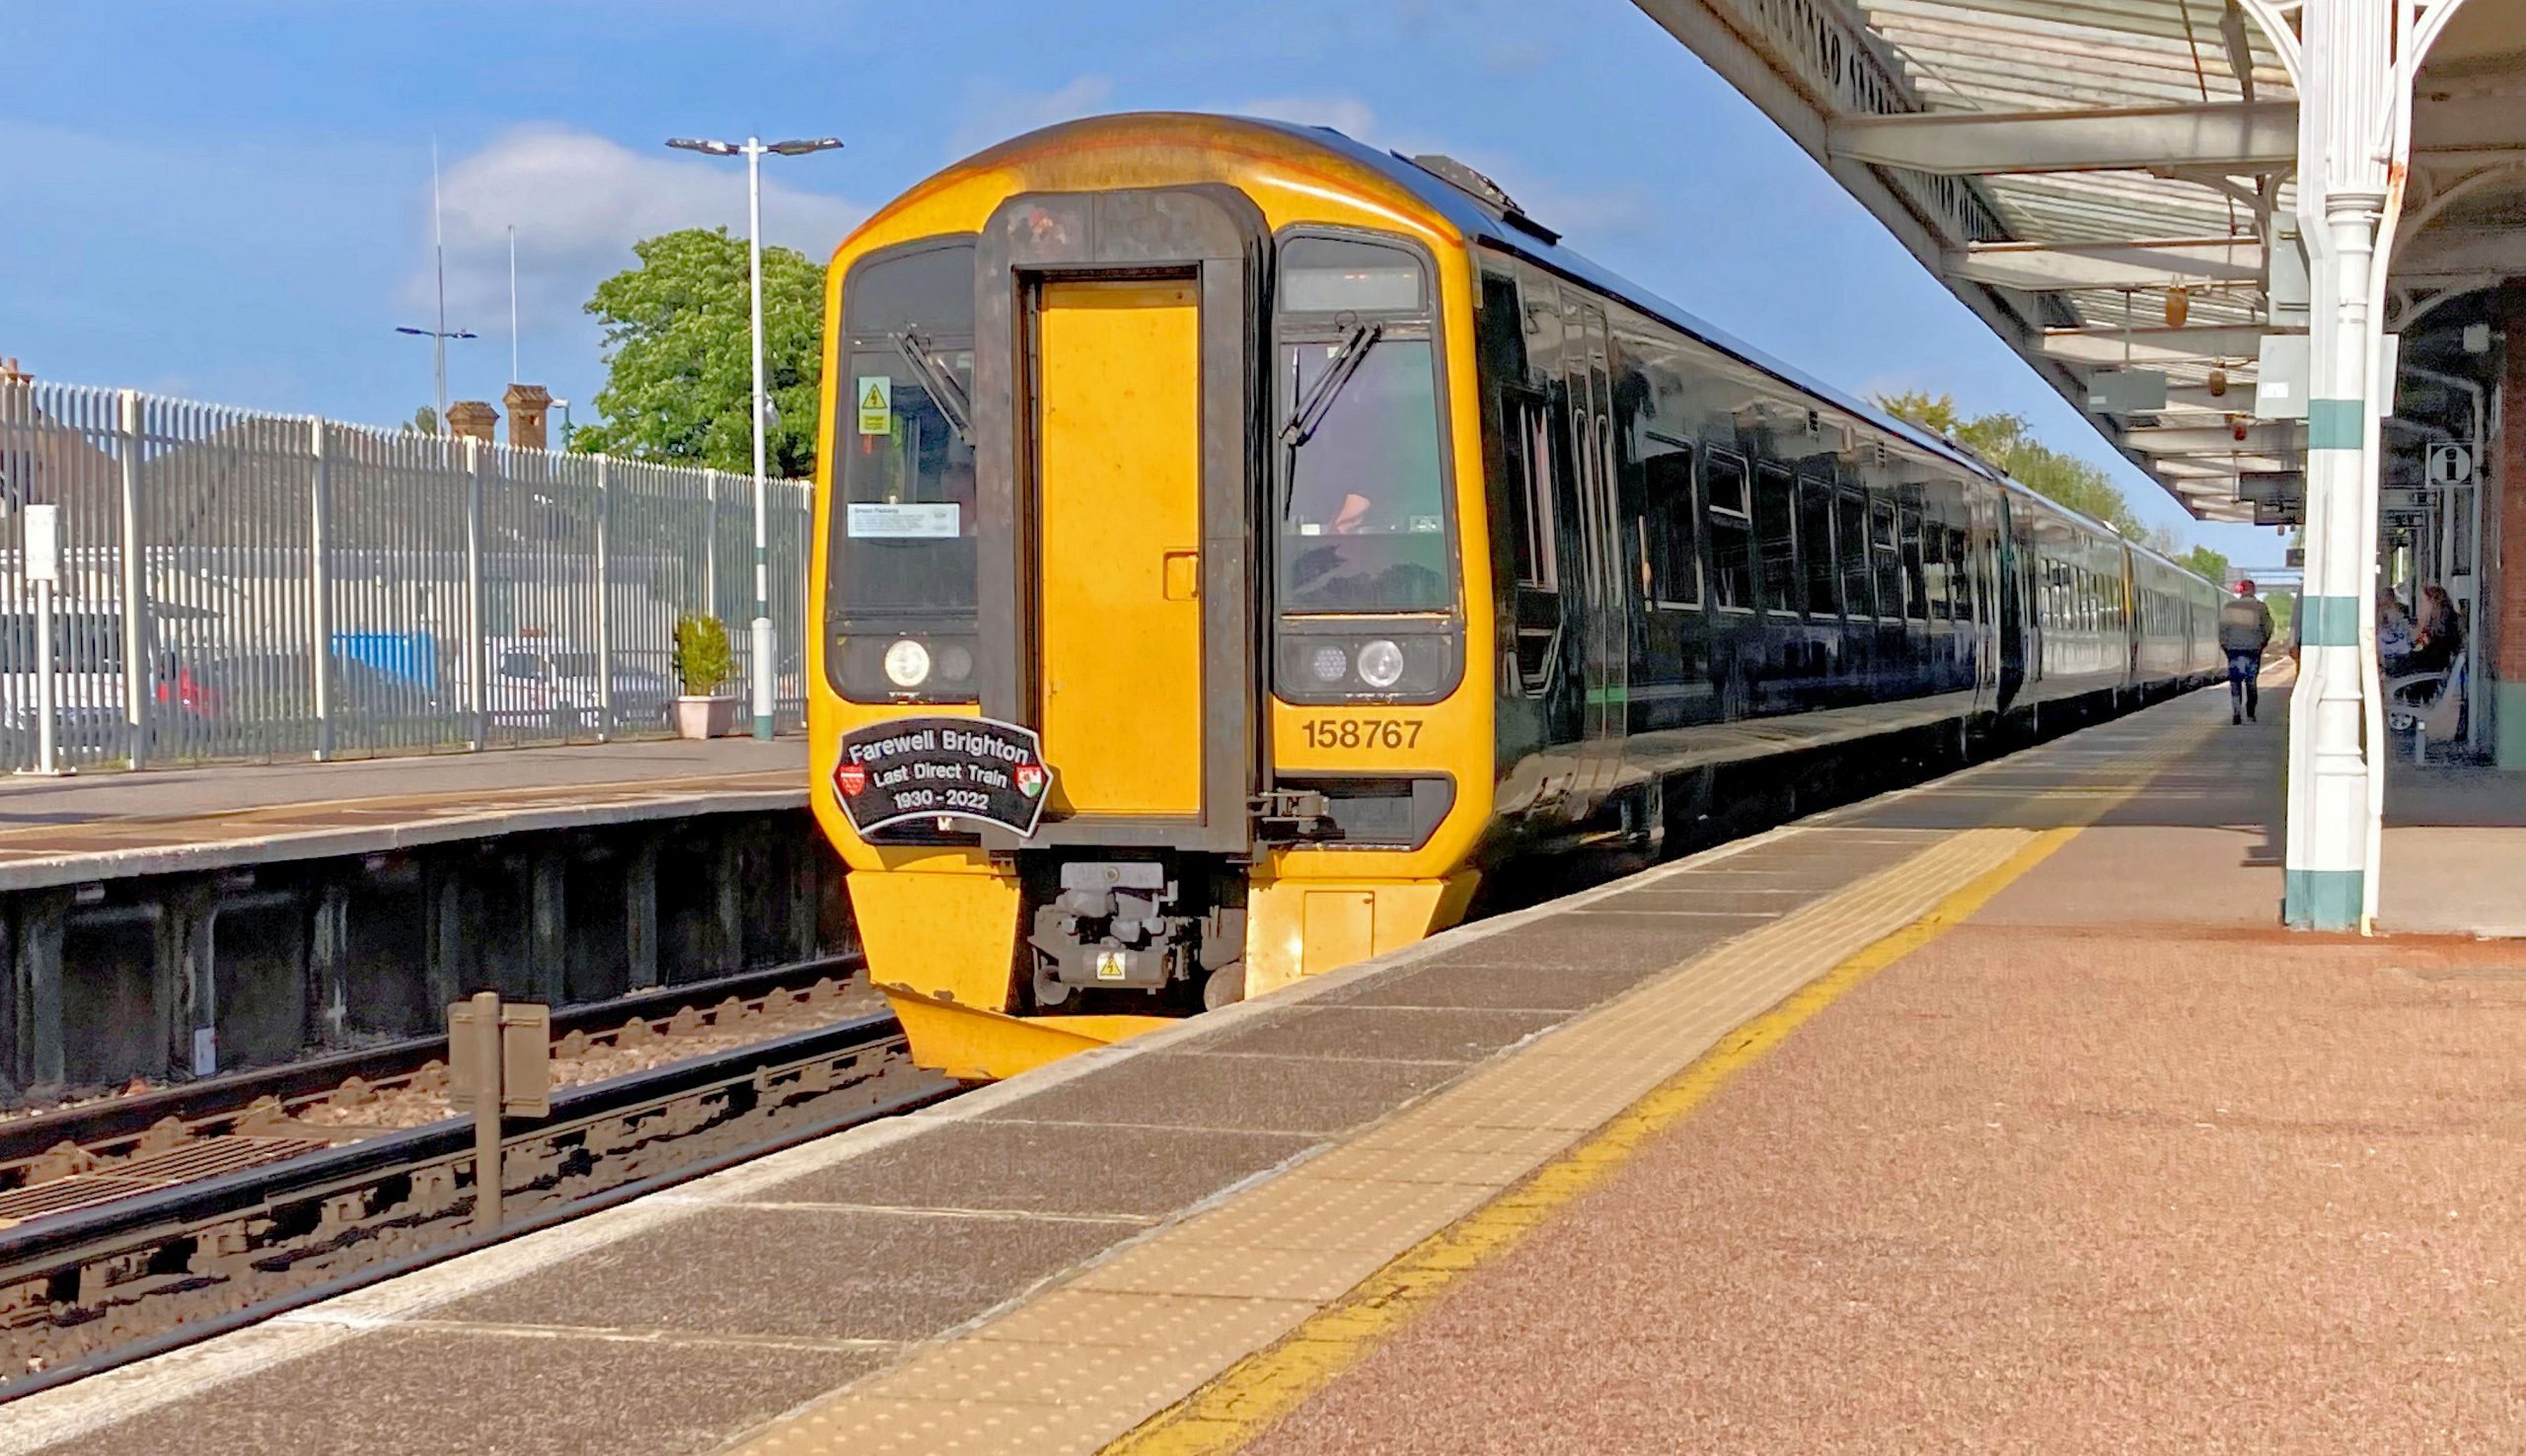 Class 158 767 & 158798 at Barnham form the last ever GWR service on West Coastway, the 17:02 Brighton to Bristol Parkway on Friday 13 May 22. Part of a Chichester member's regular Monday to Friday commute. Image Credit: Andy Perry